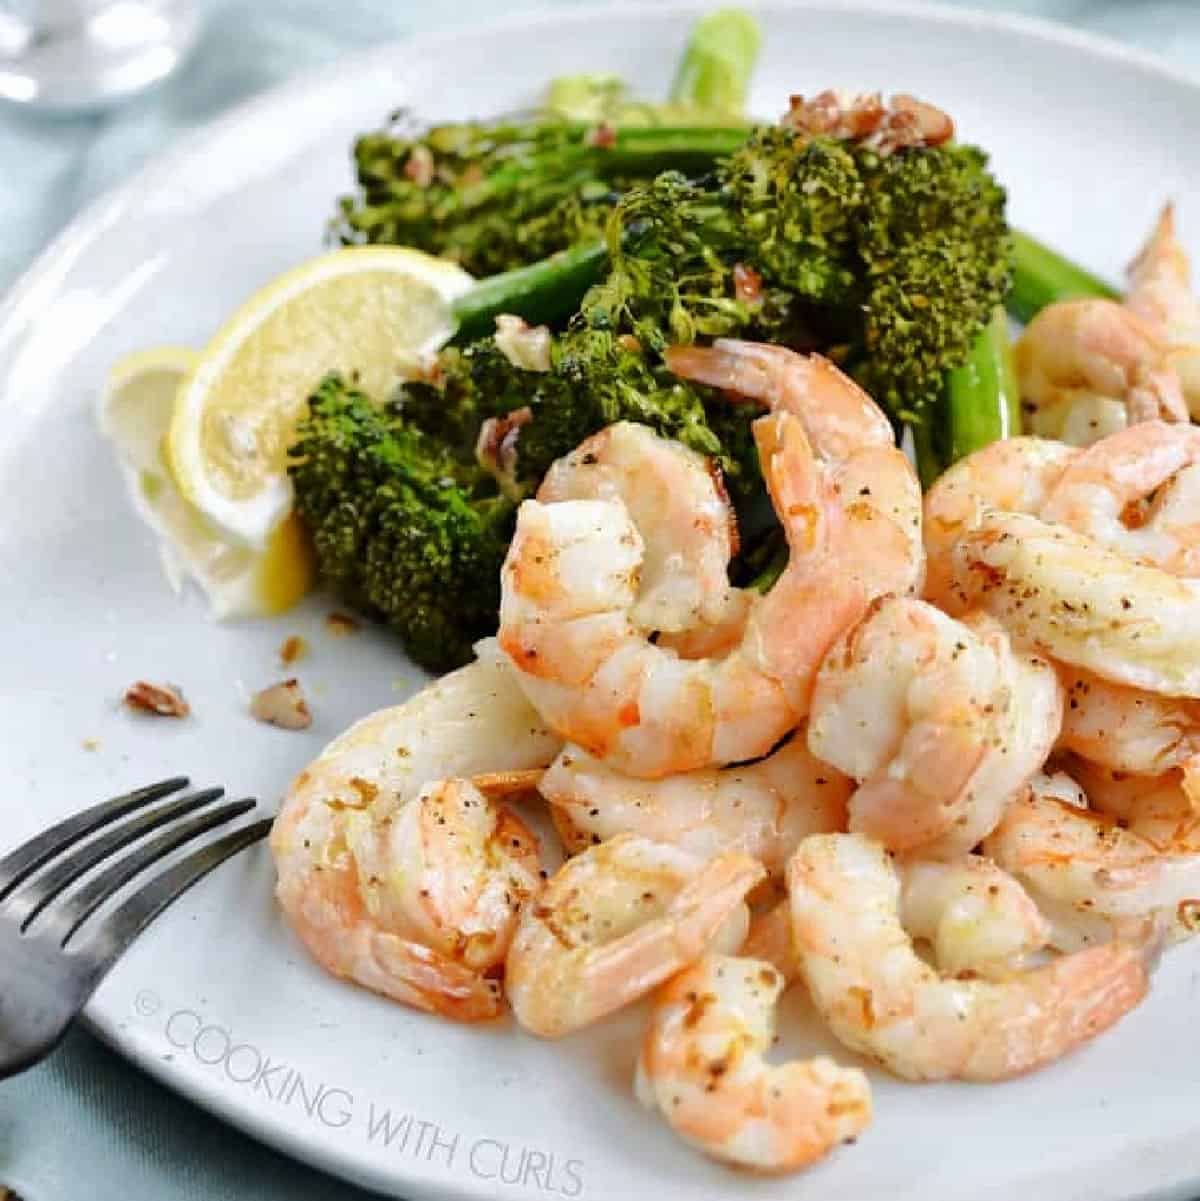 Oven roasted sheet pan shrimp and broccolini on a plate.